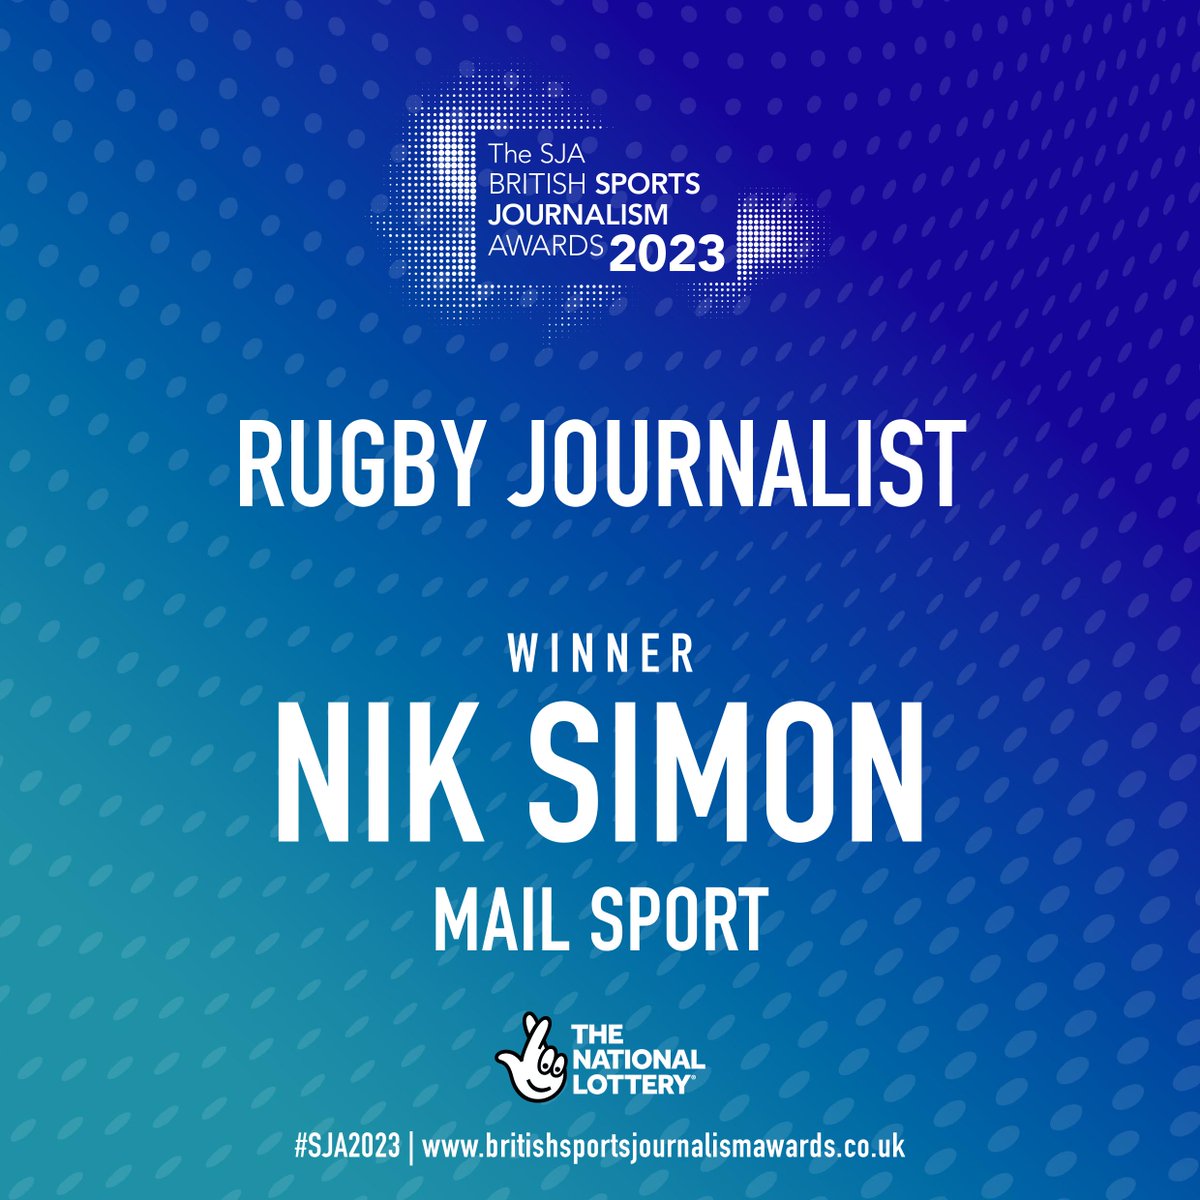 Making its return year, we have the Rugby Journalist of the Year, and the winner is @nik_simon88! He was praised for a 'game-changing' interview on racism. Well done Nik! 🏉 #SJA2023